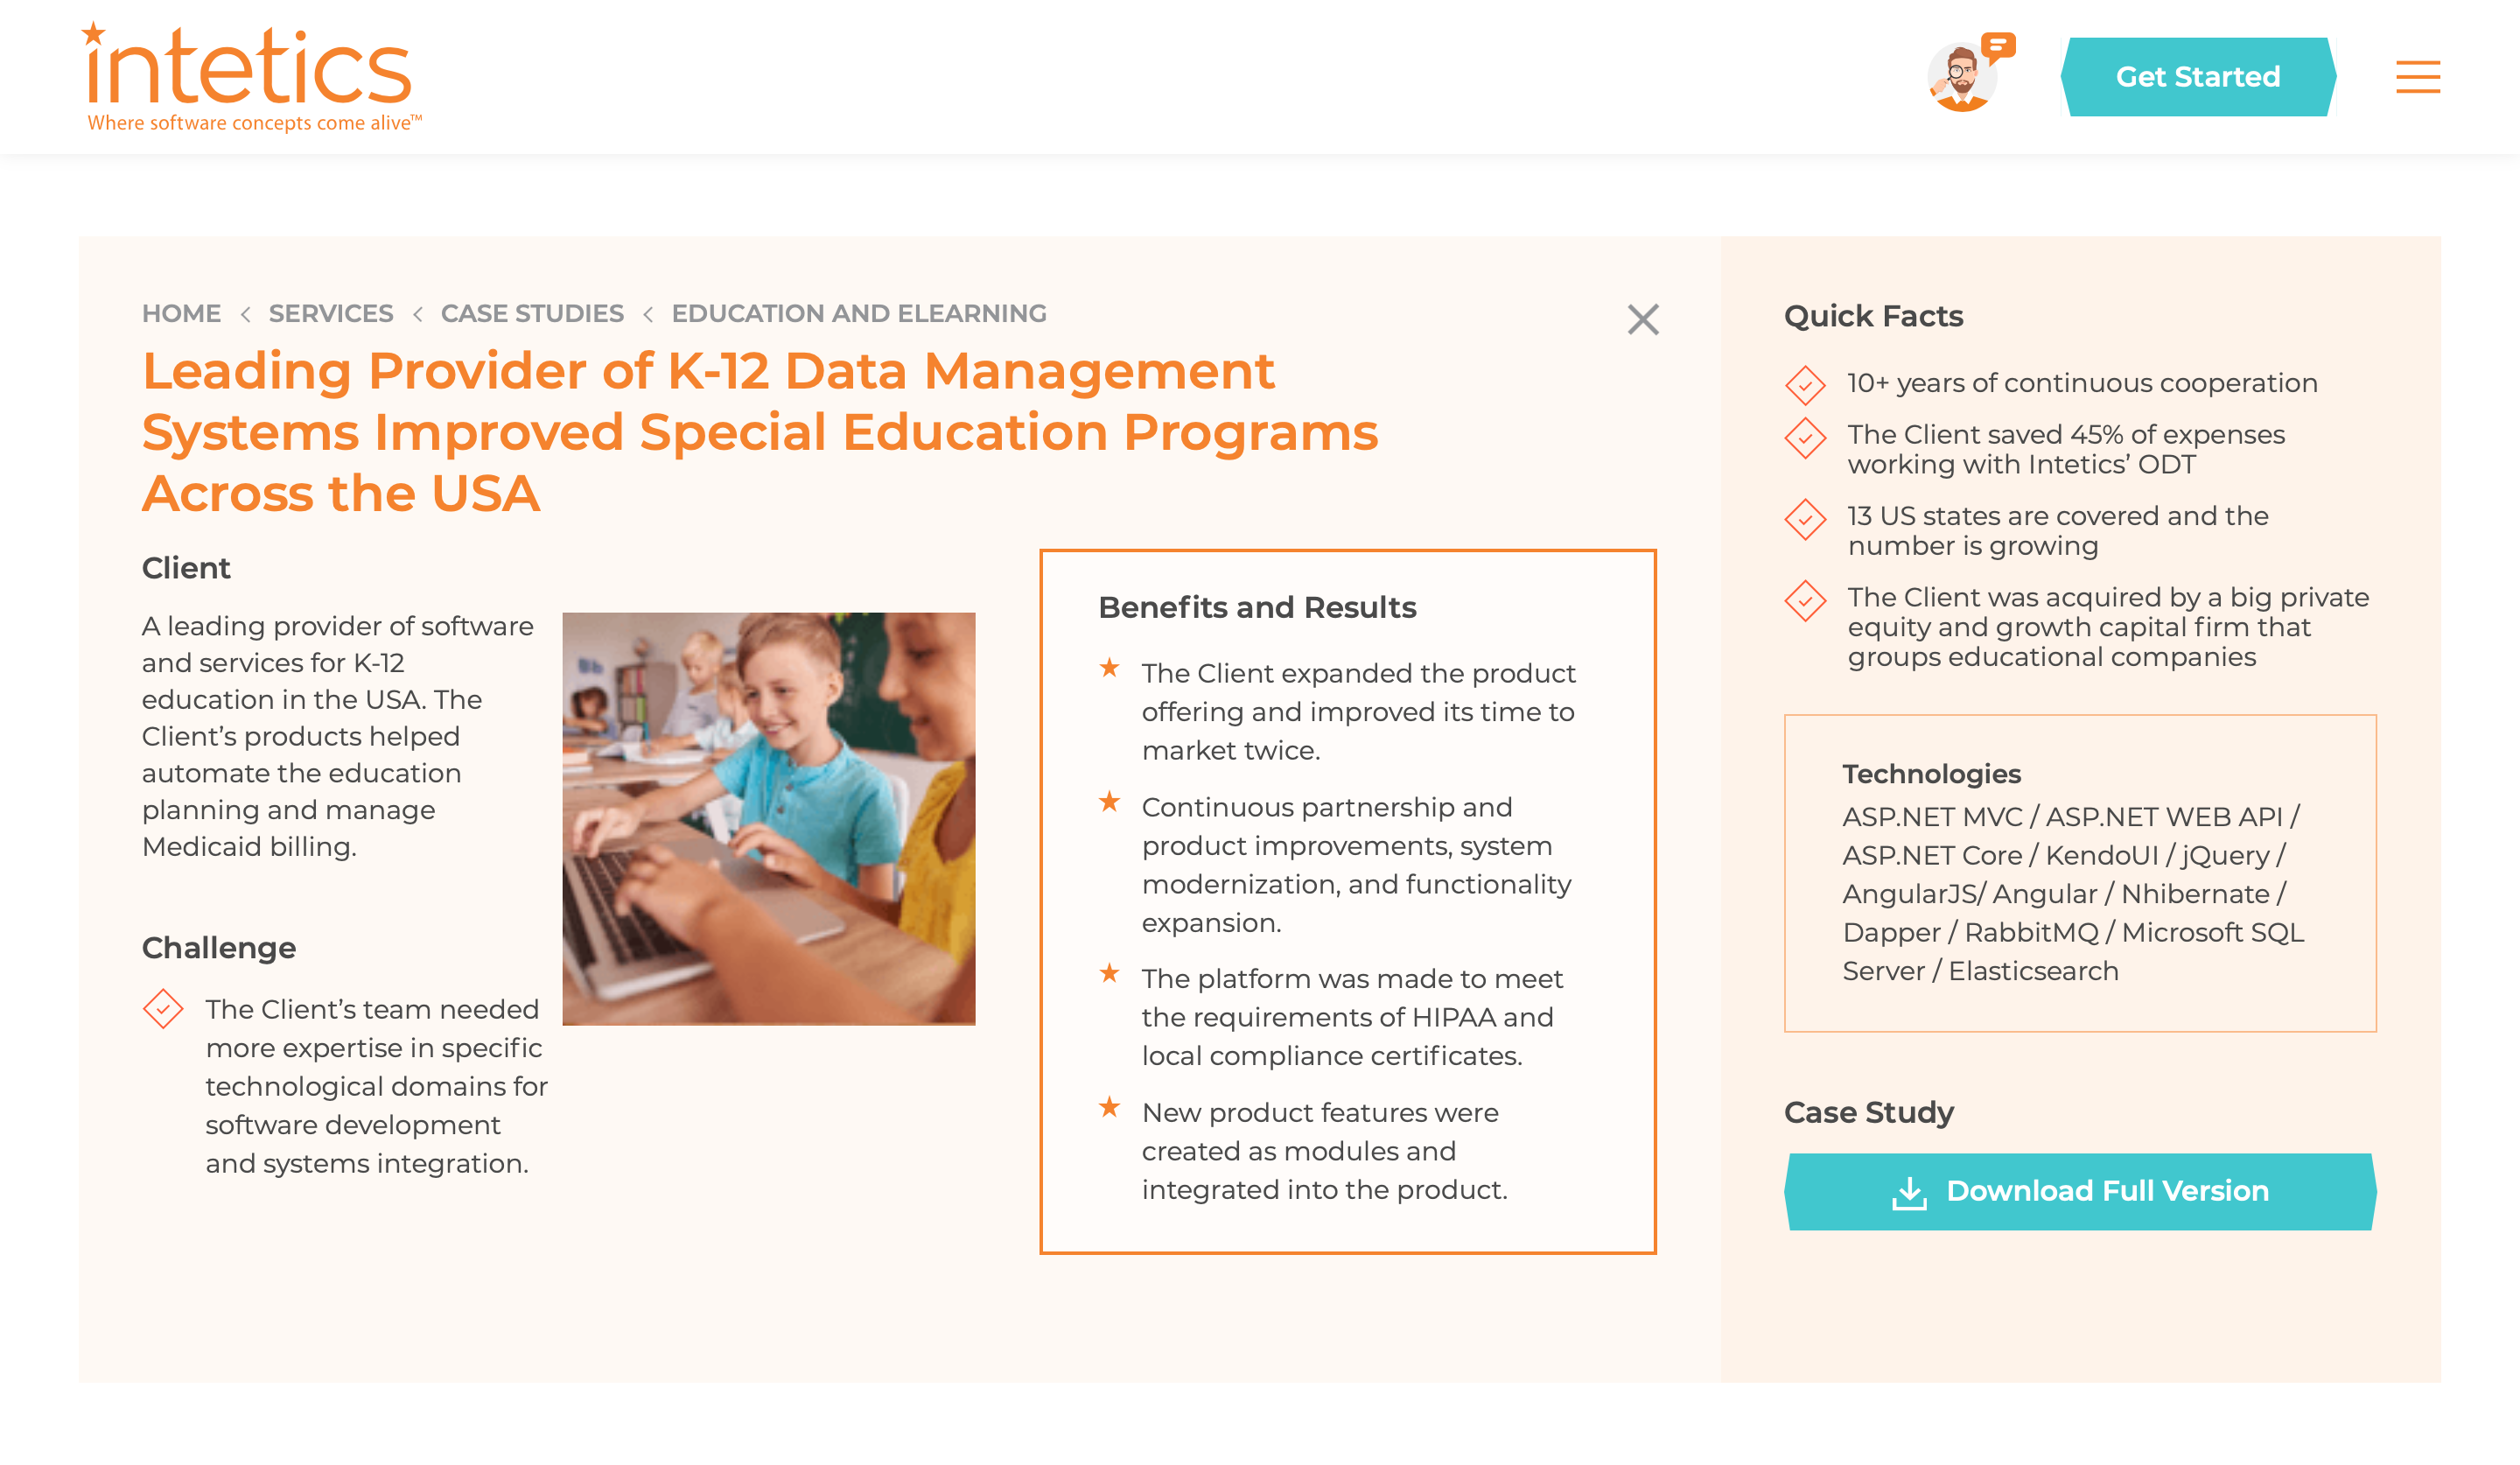 Leading Provider of K-12 Data Management Systems Improved Special Education Programs Across the USA